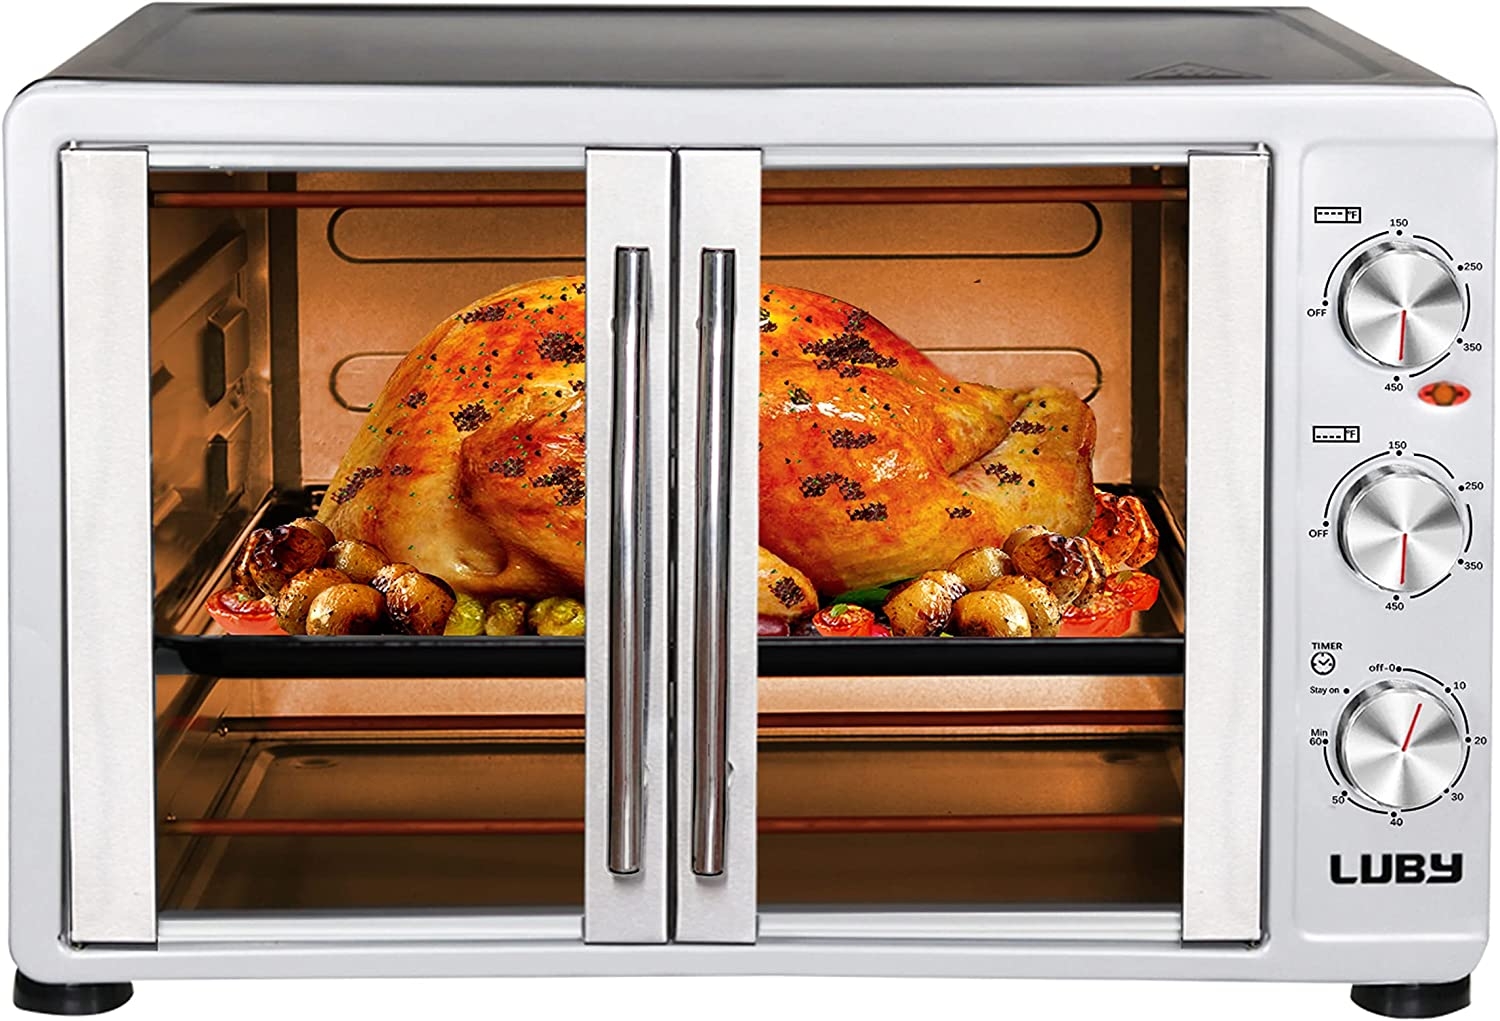 LUBY Large Toaster Oven Countertop, French Door Designed, 55L, 18 Slices, 14” pizza, 20lb Turkey, Silver Import To Shop